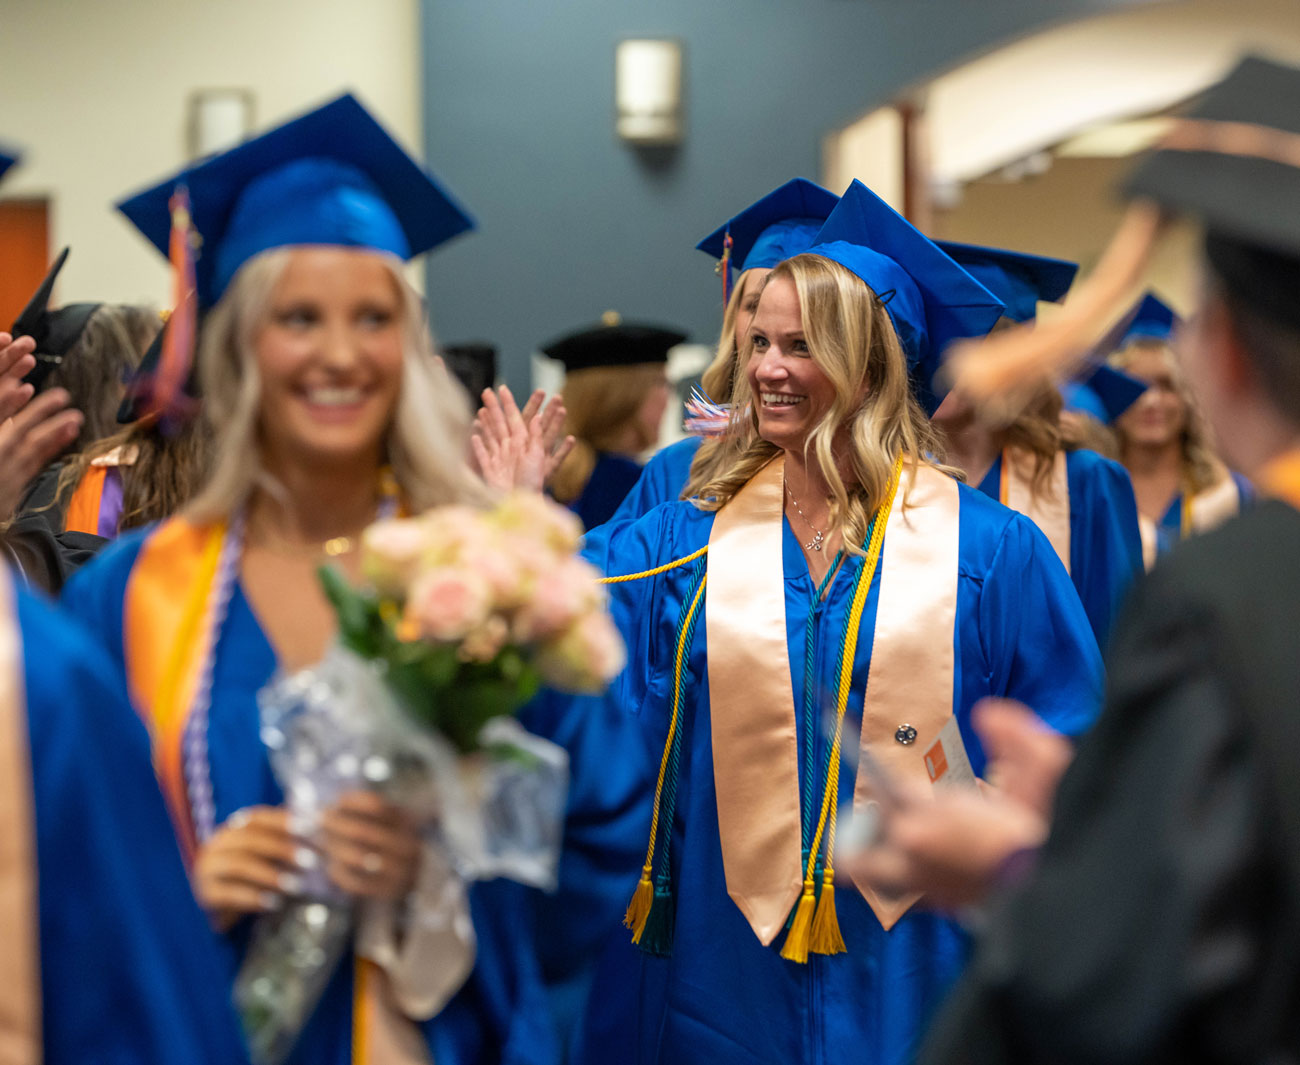 Brynn Sorensen waves to family as the students process during the Convocation ceremony in their regalia.